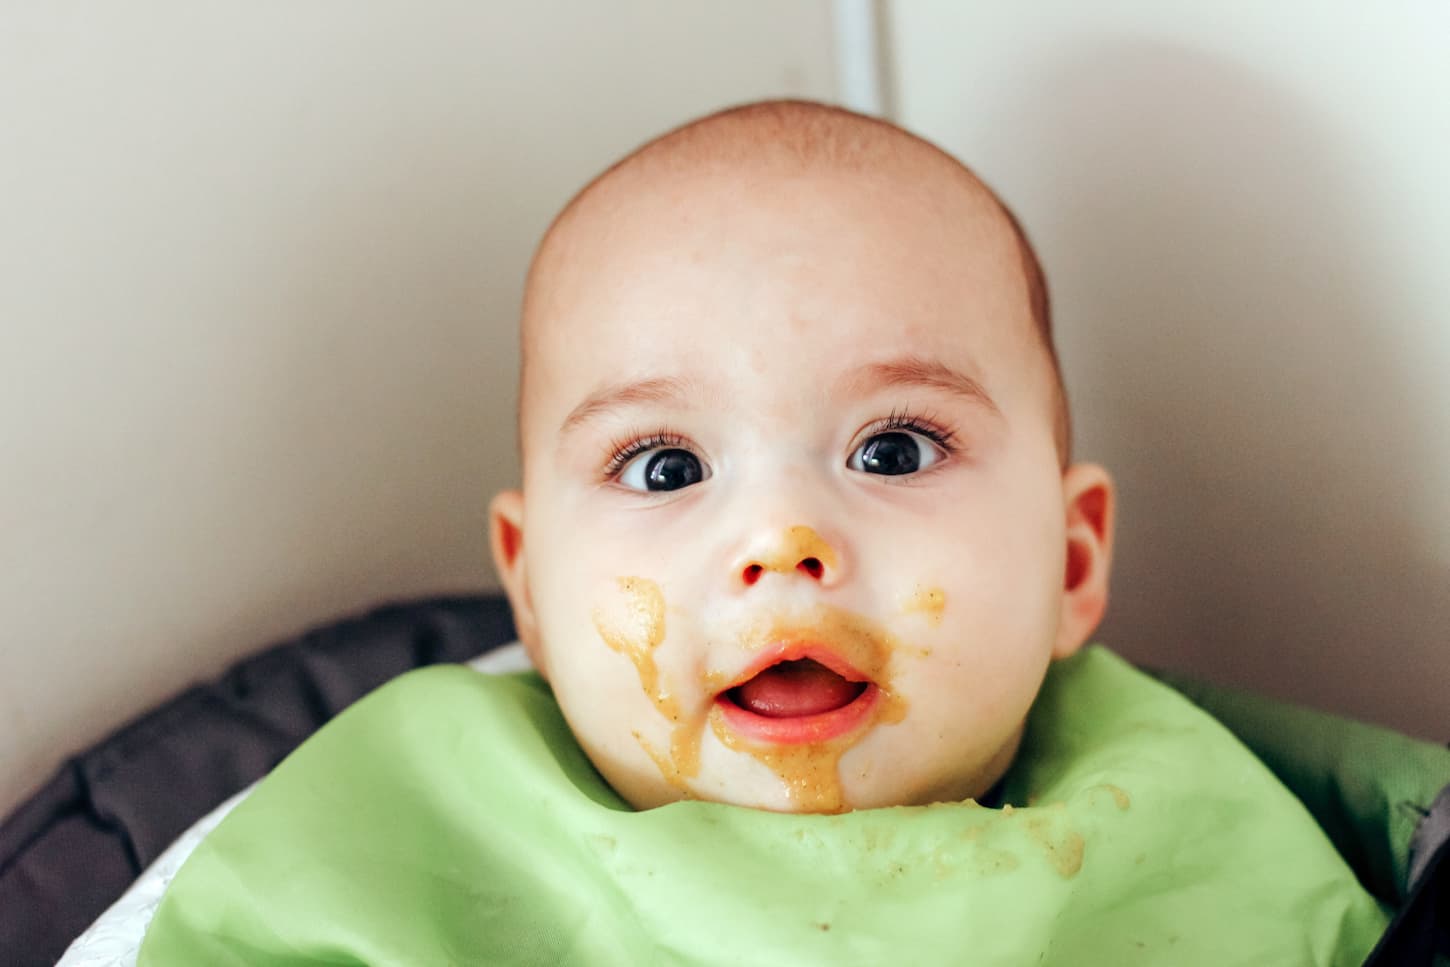 An image of a Happy smiling baby with a dirty face during feeding time.